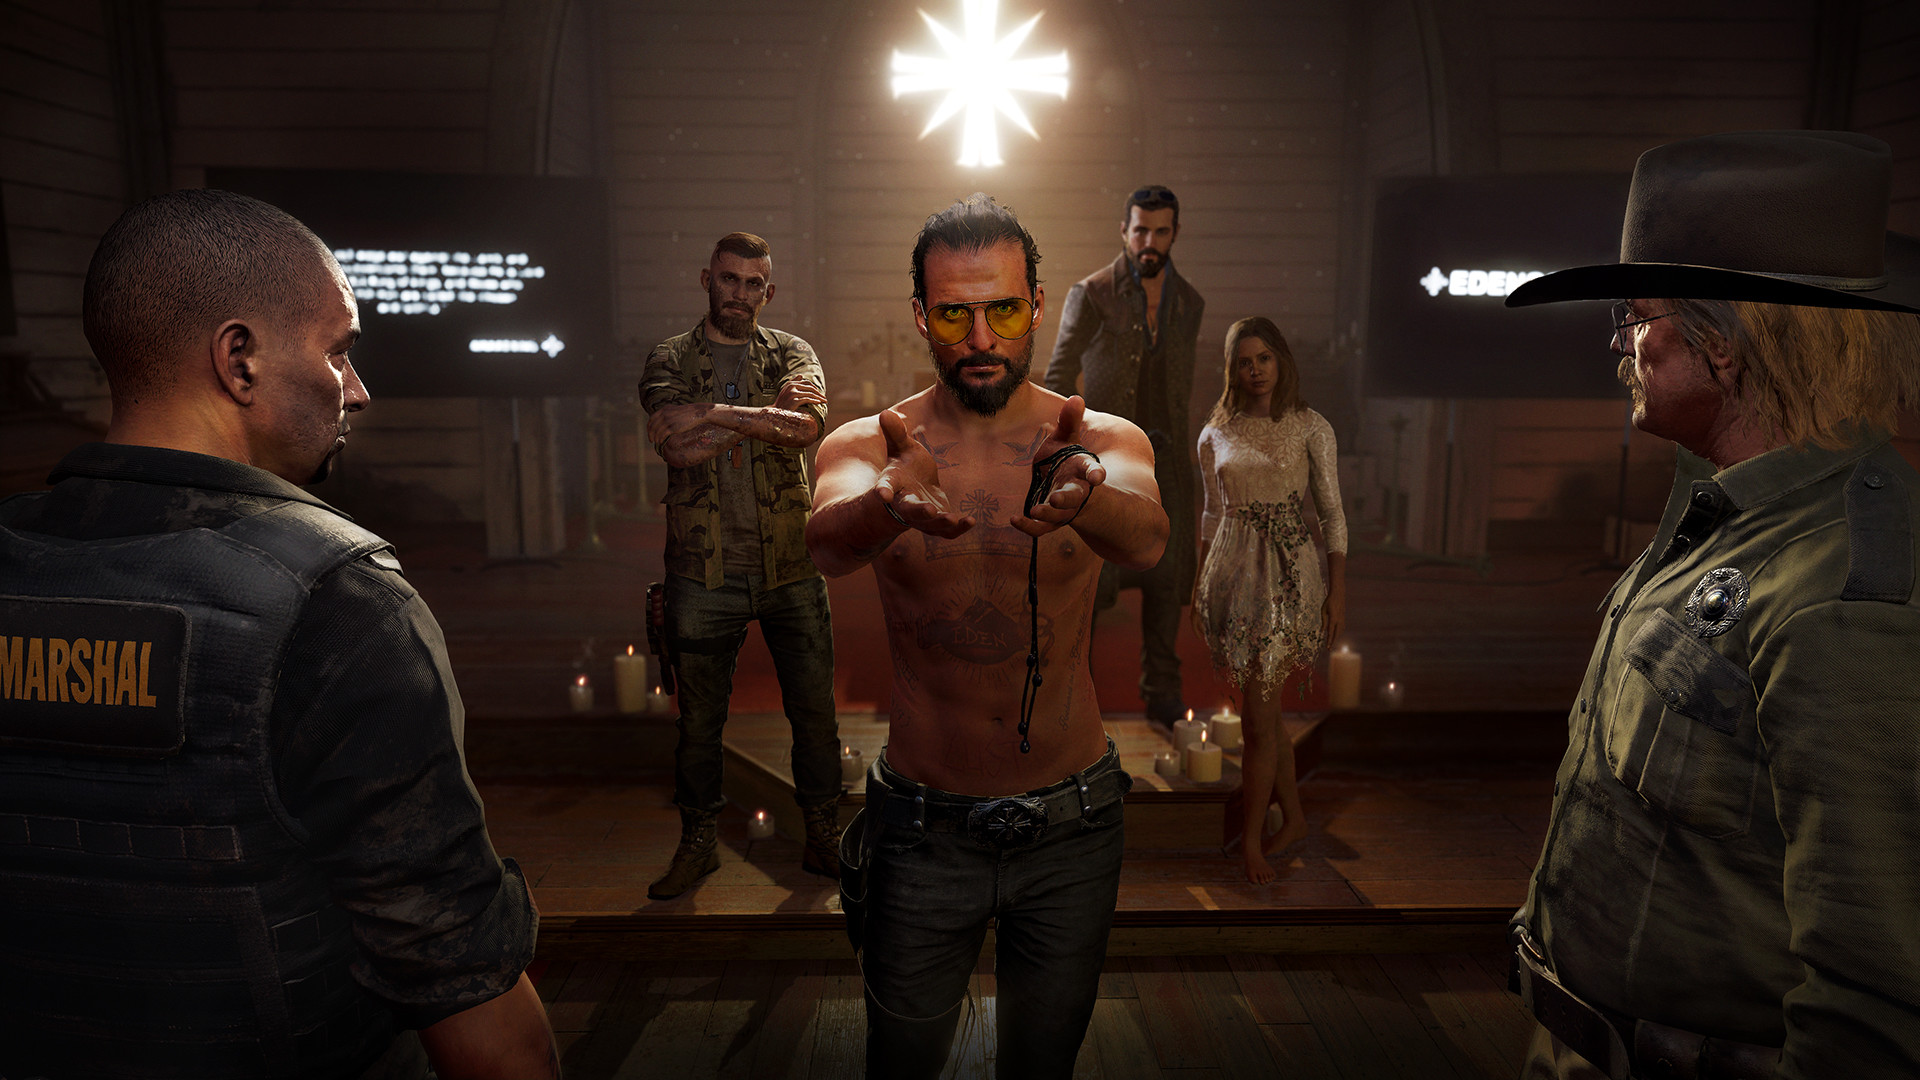 Скриншот *Far Cry 5 Deluxe Edition [PS4] 5.05 / 6.72 / 7.02 [EUR] (2018) [Русский] (v1.12)*